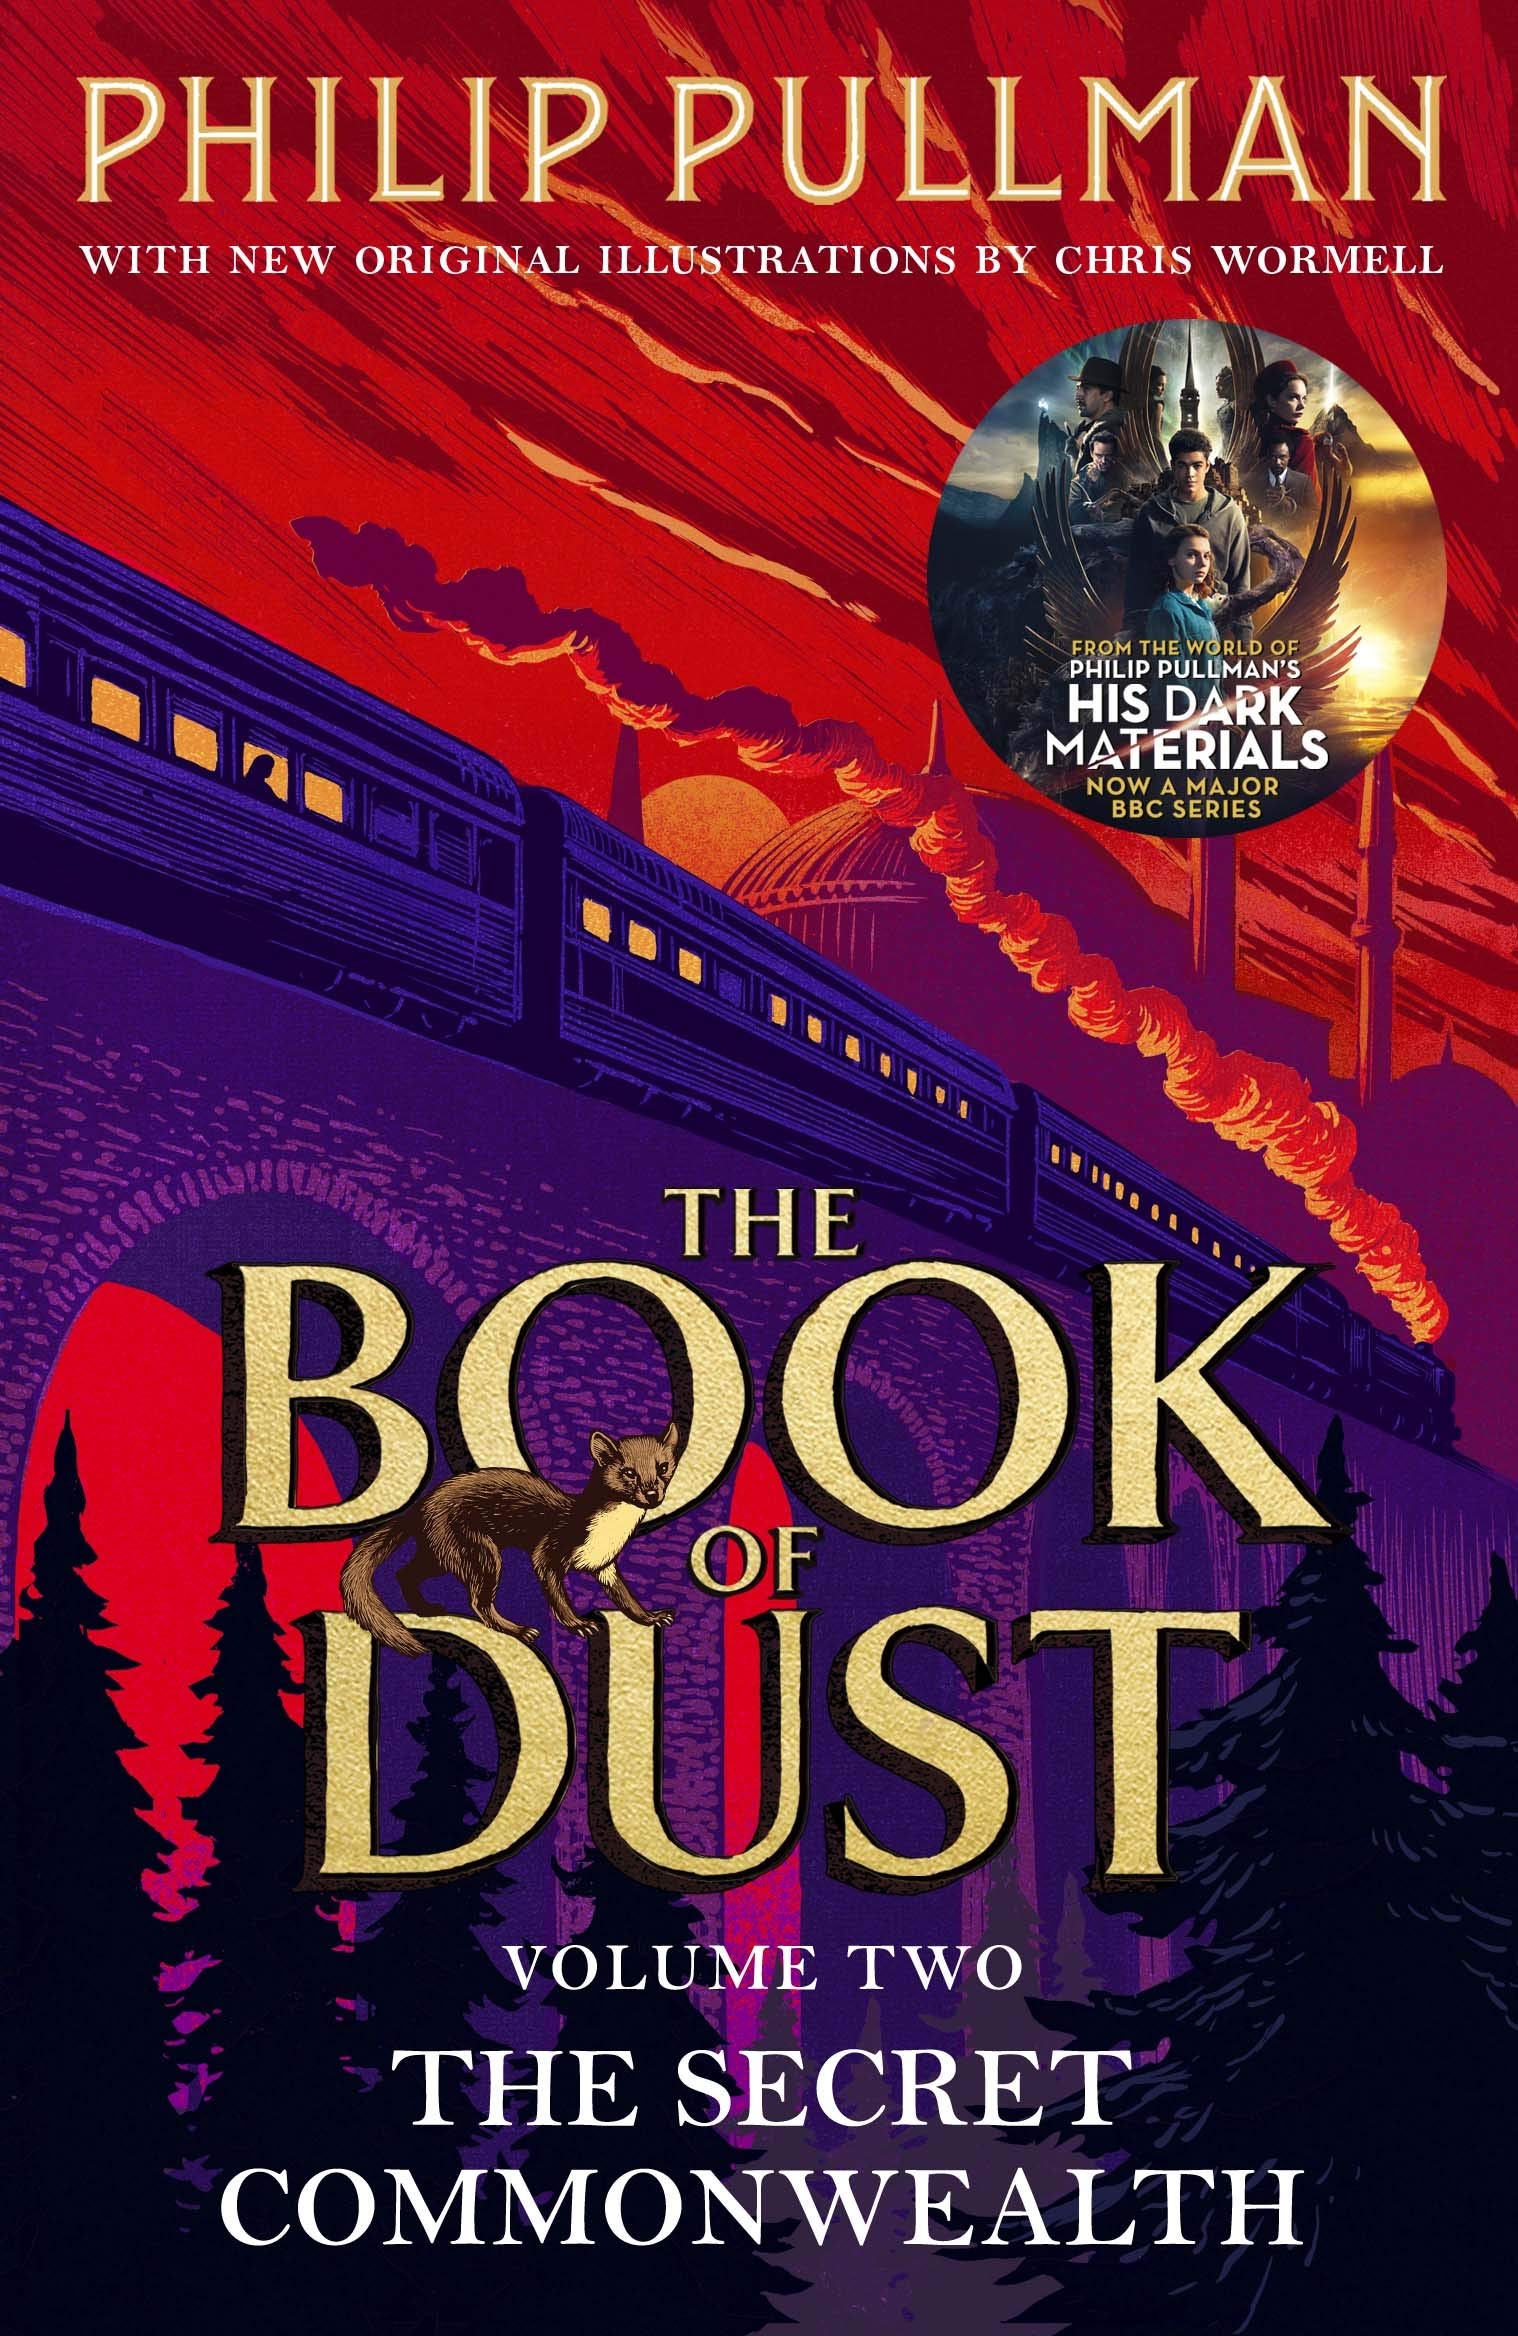 Pullman P. - Secret commonwealth: the book of dust volume two